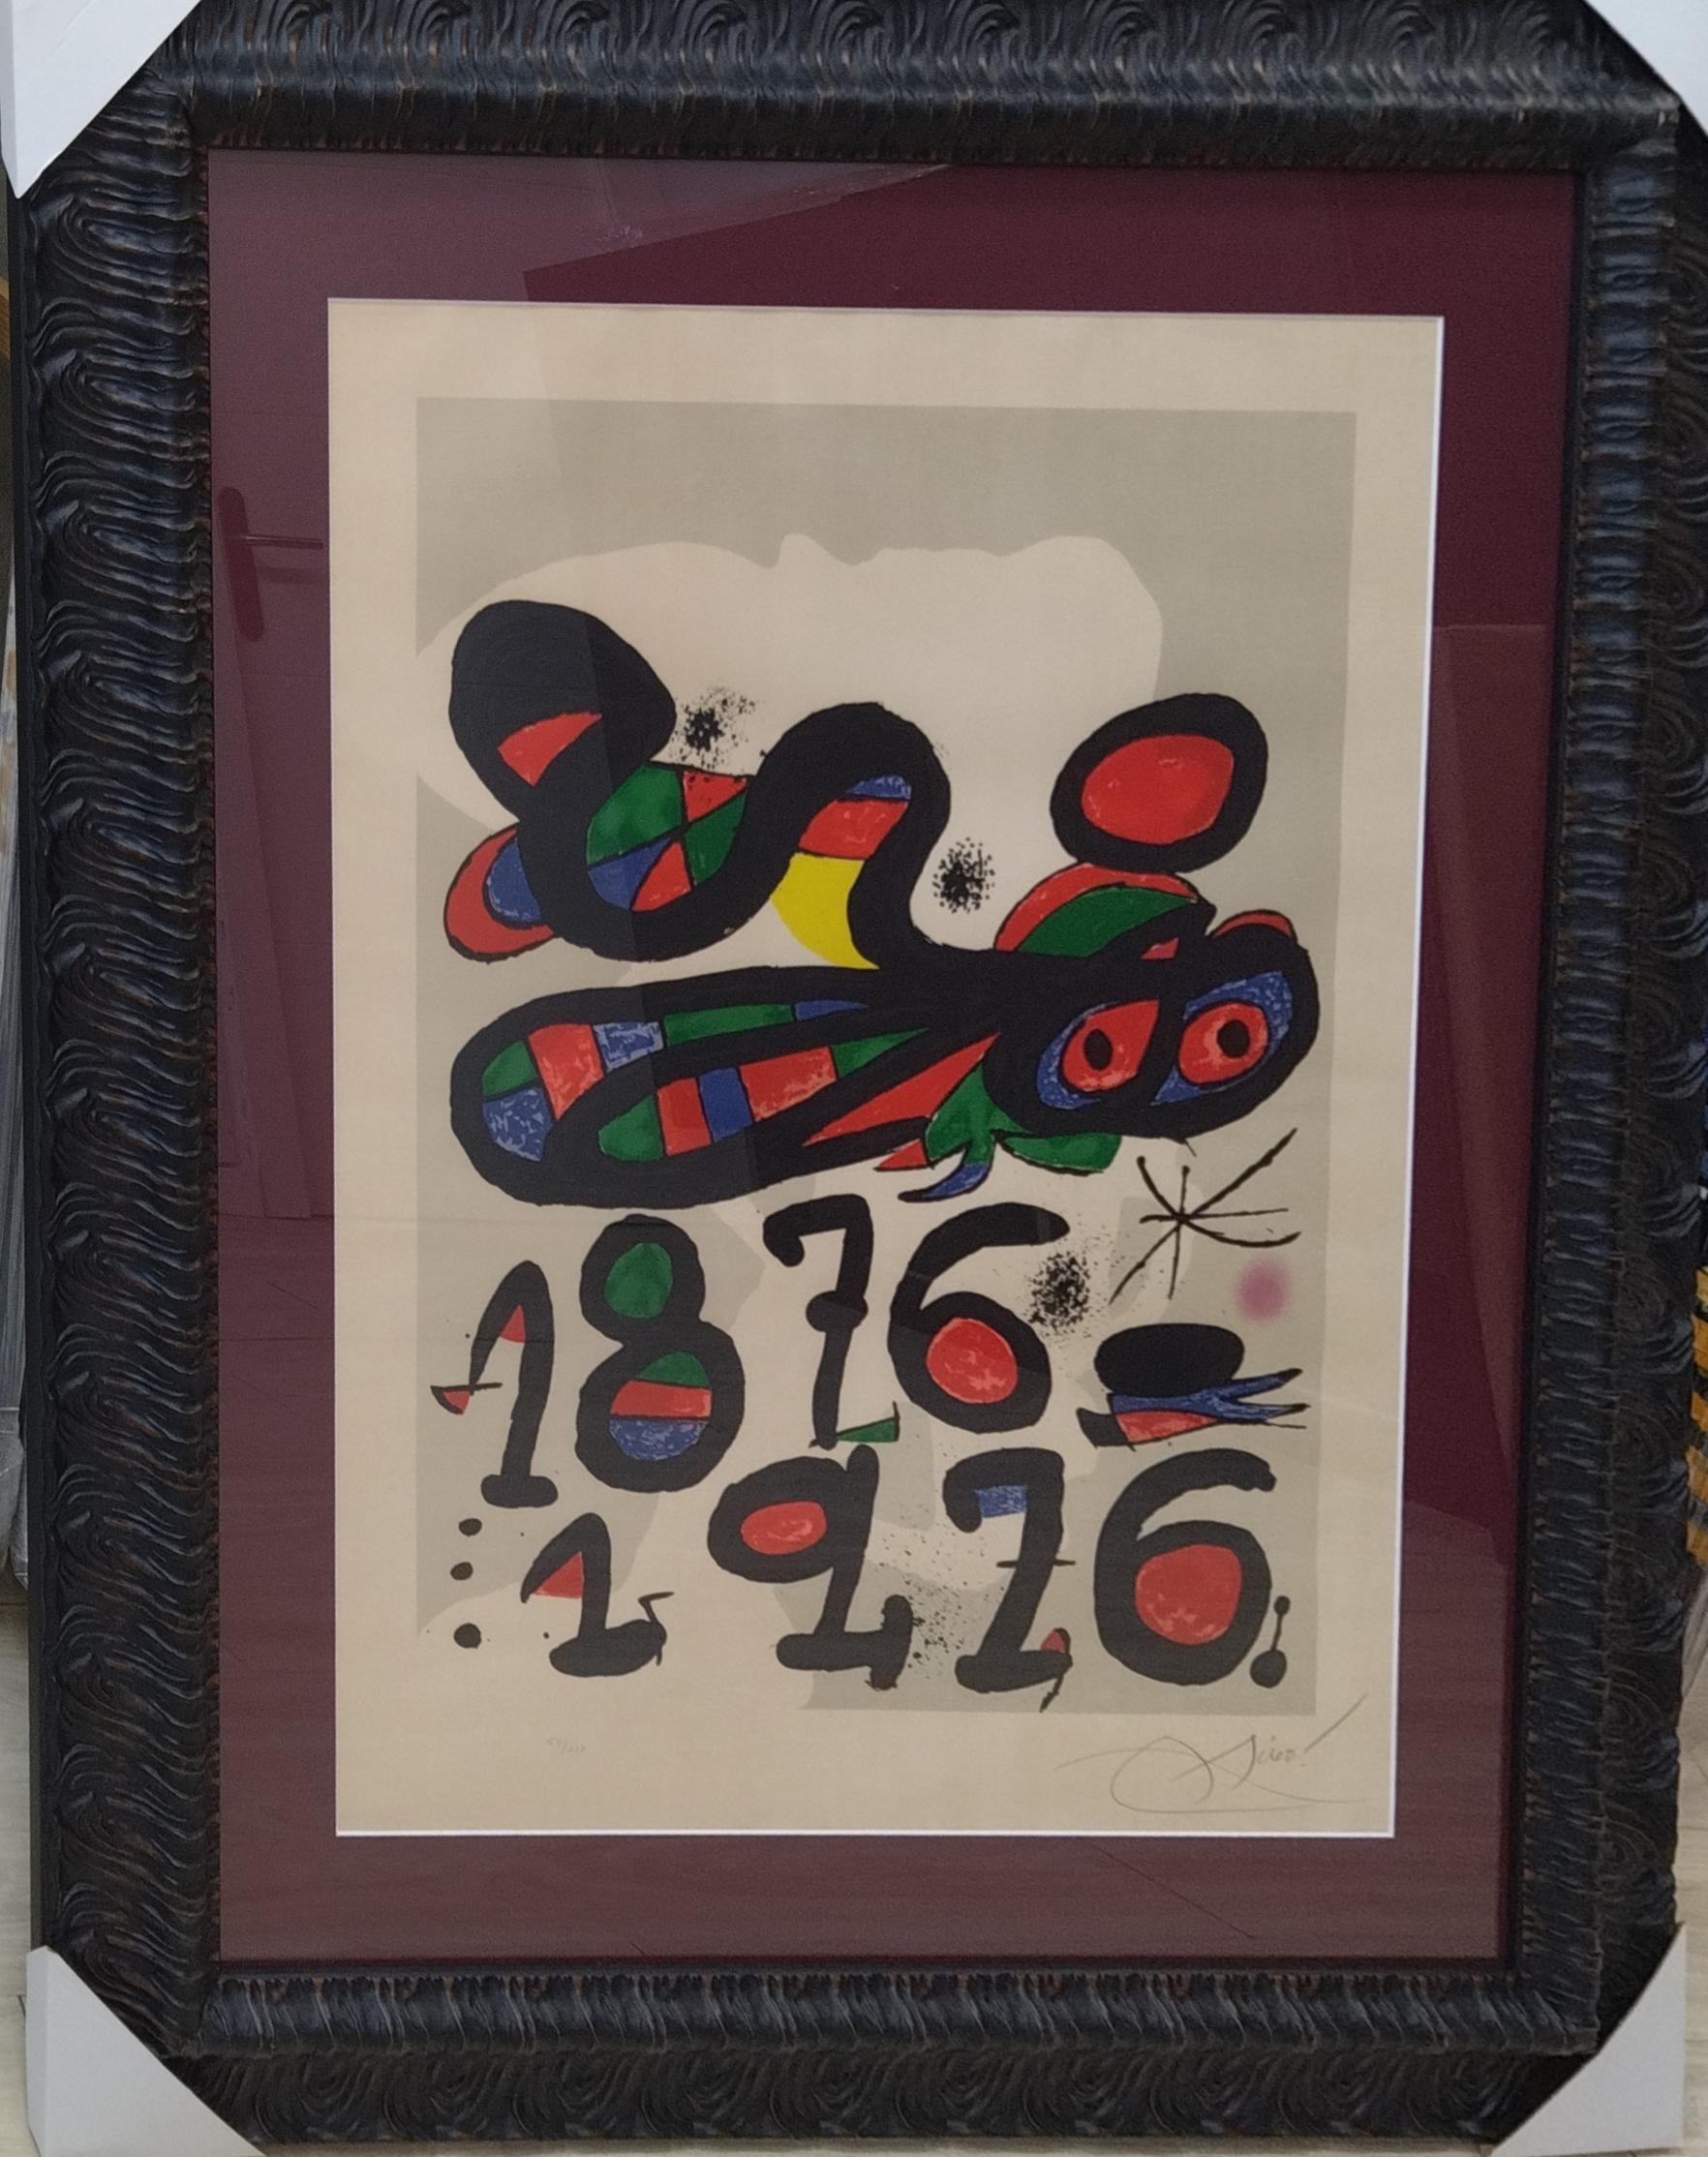 Miro   Numbers  Letters  Red  Black  Vertical CENTRE EXCURSIONISTA. LITOGRAFIA - Print by Joan Miró